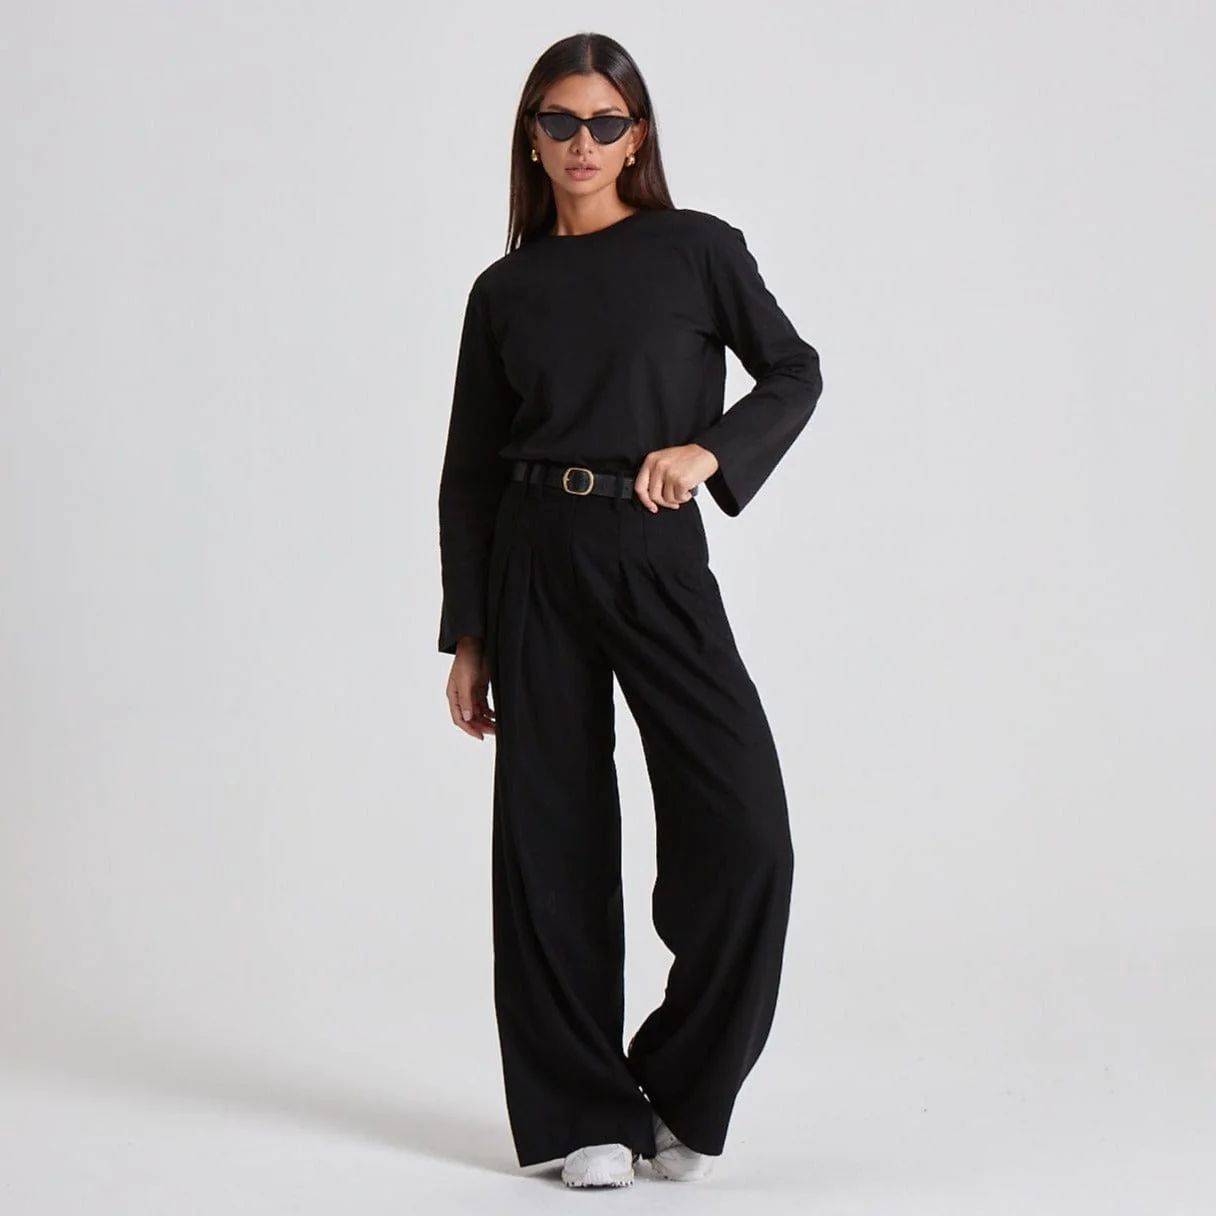 TAILORED WIDE LEG TROUSERS - BLACK | WAT The Brand